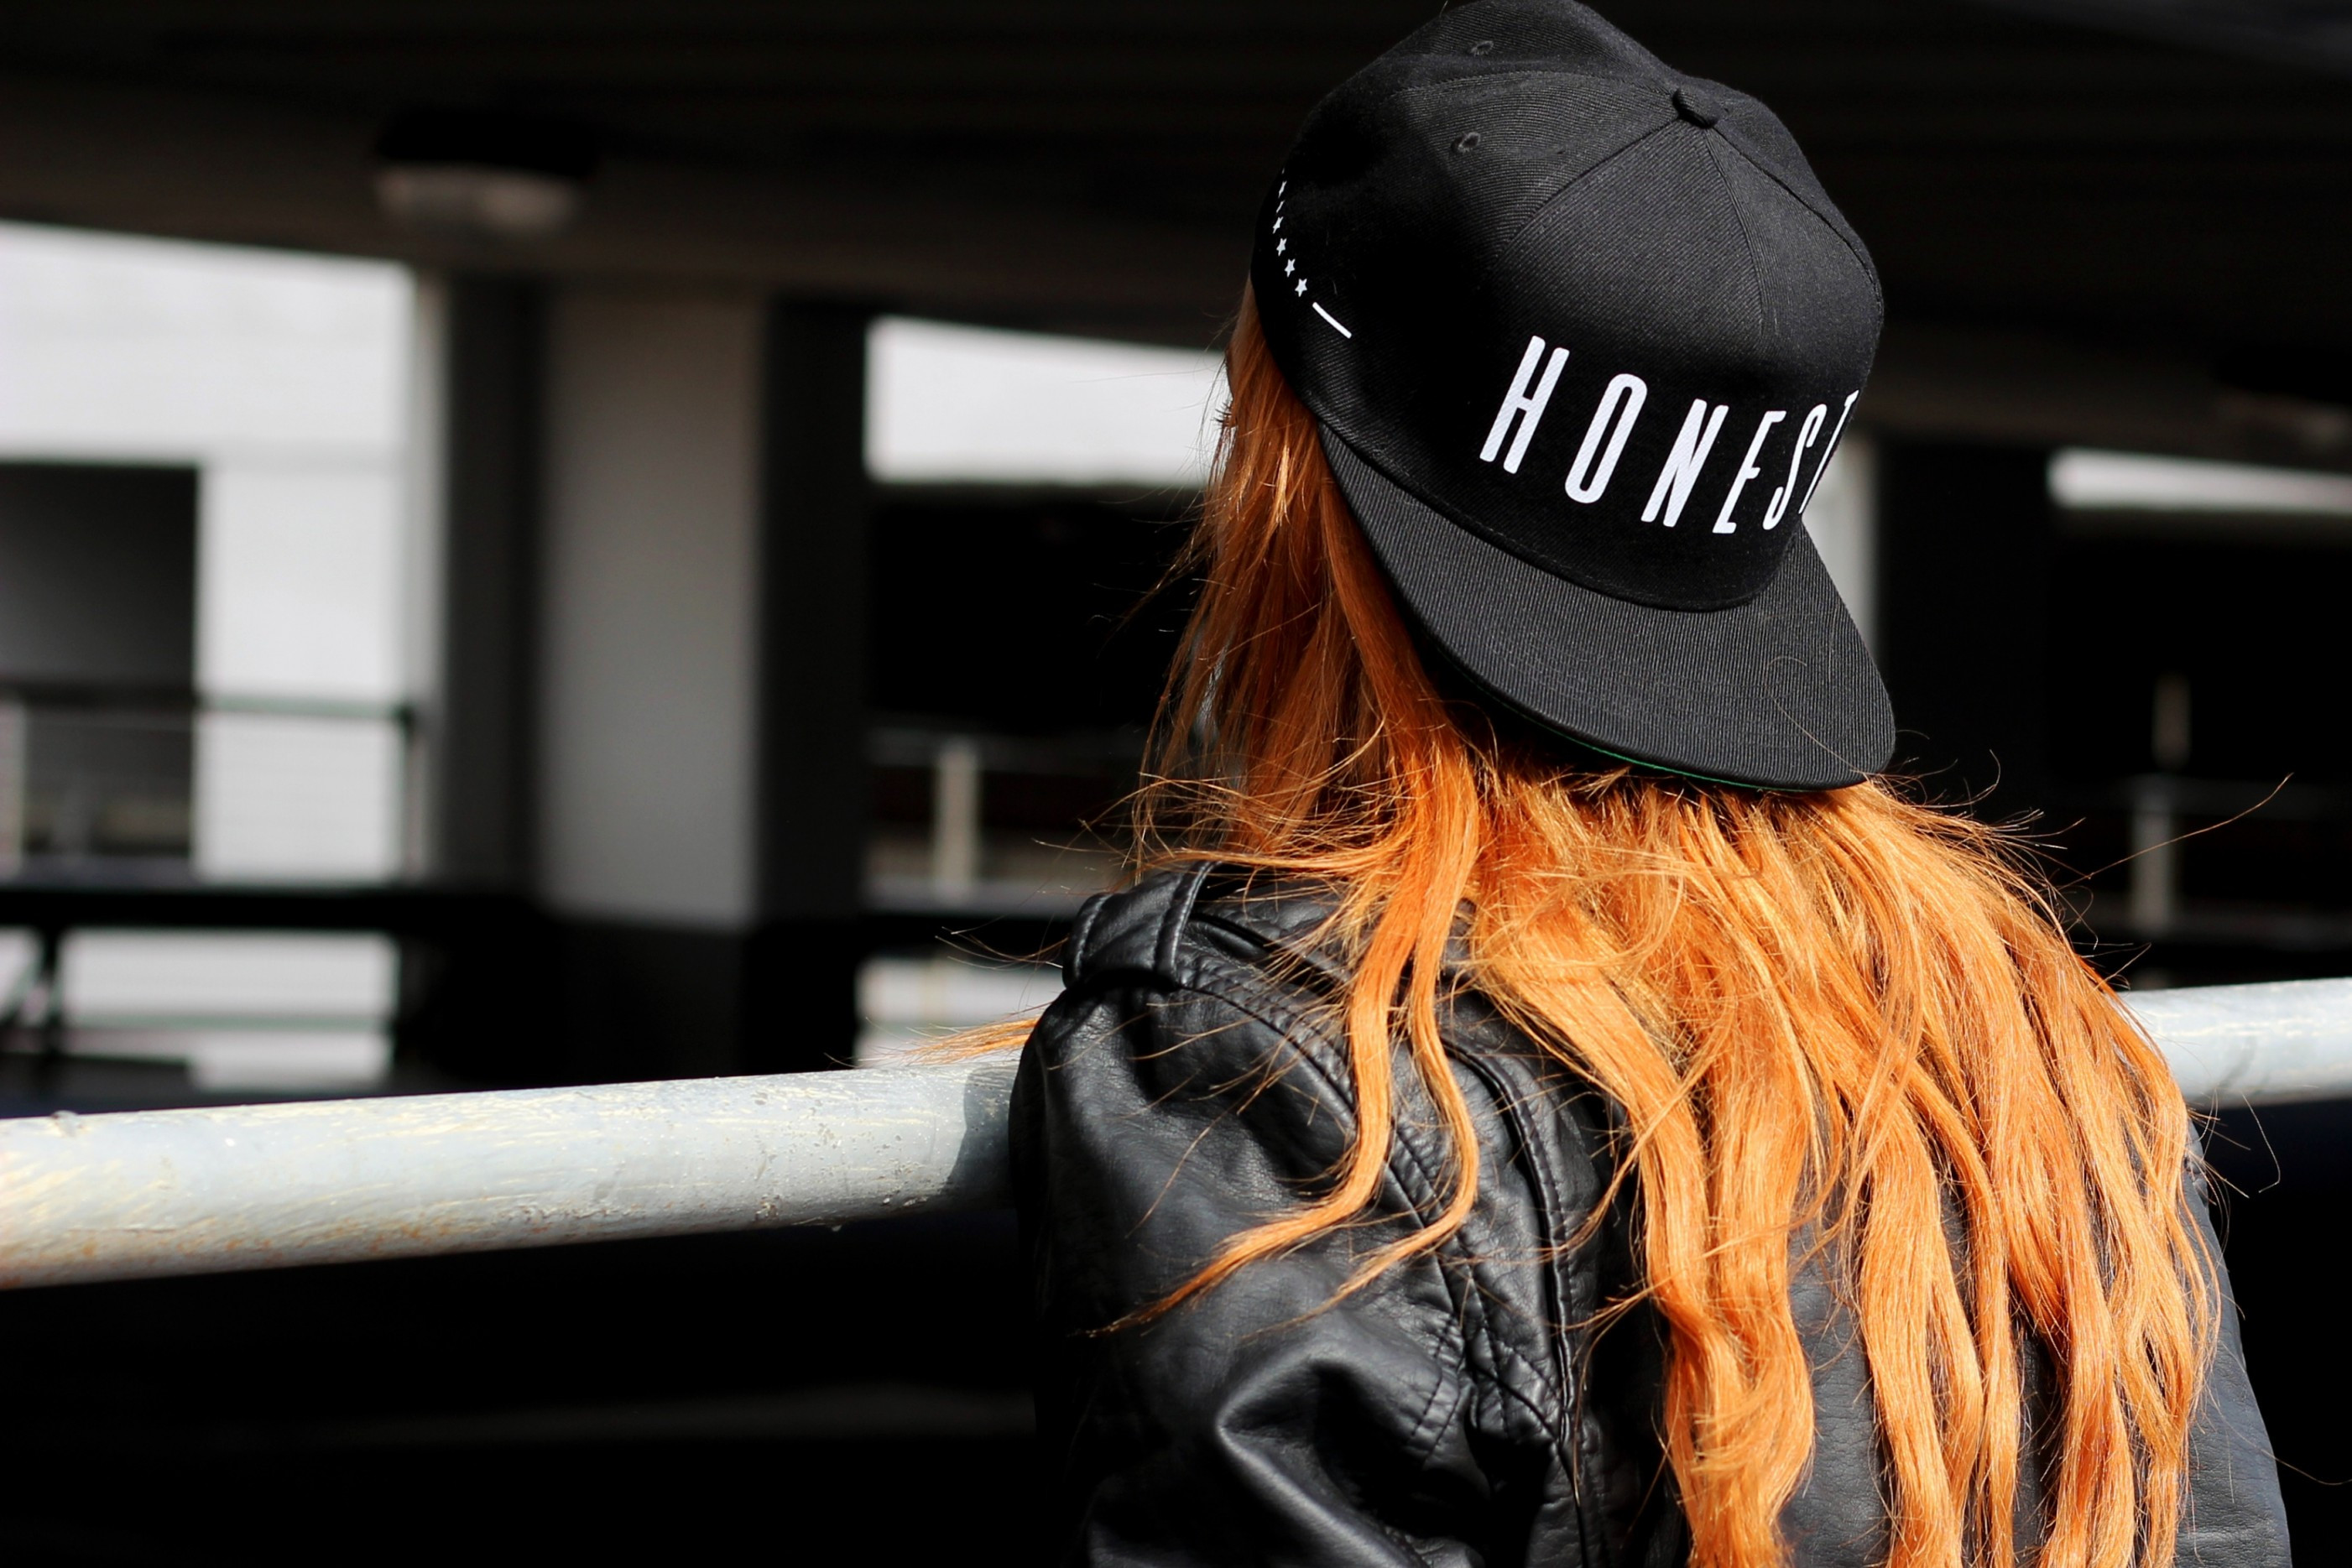 Download 2803x1869 Redhead, Girl, Hat, Jacket, Back View Wallpaper